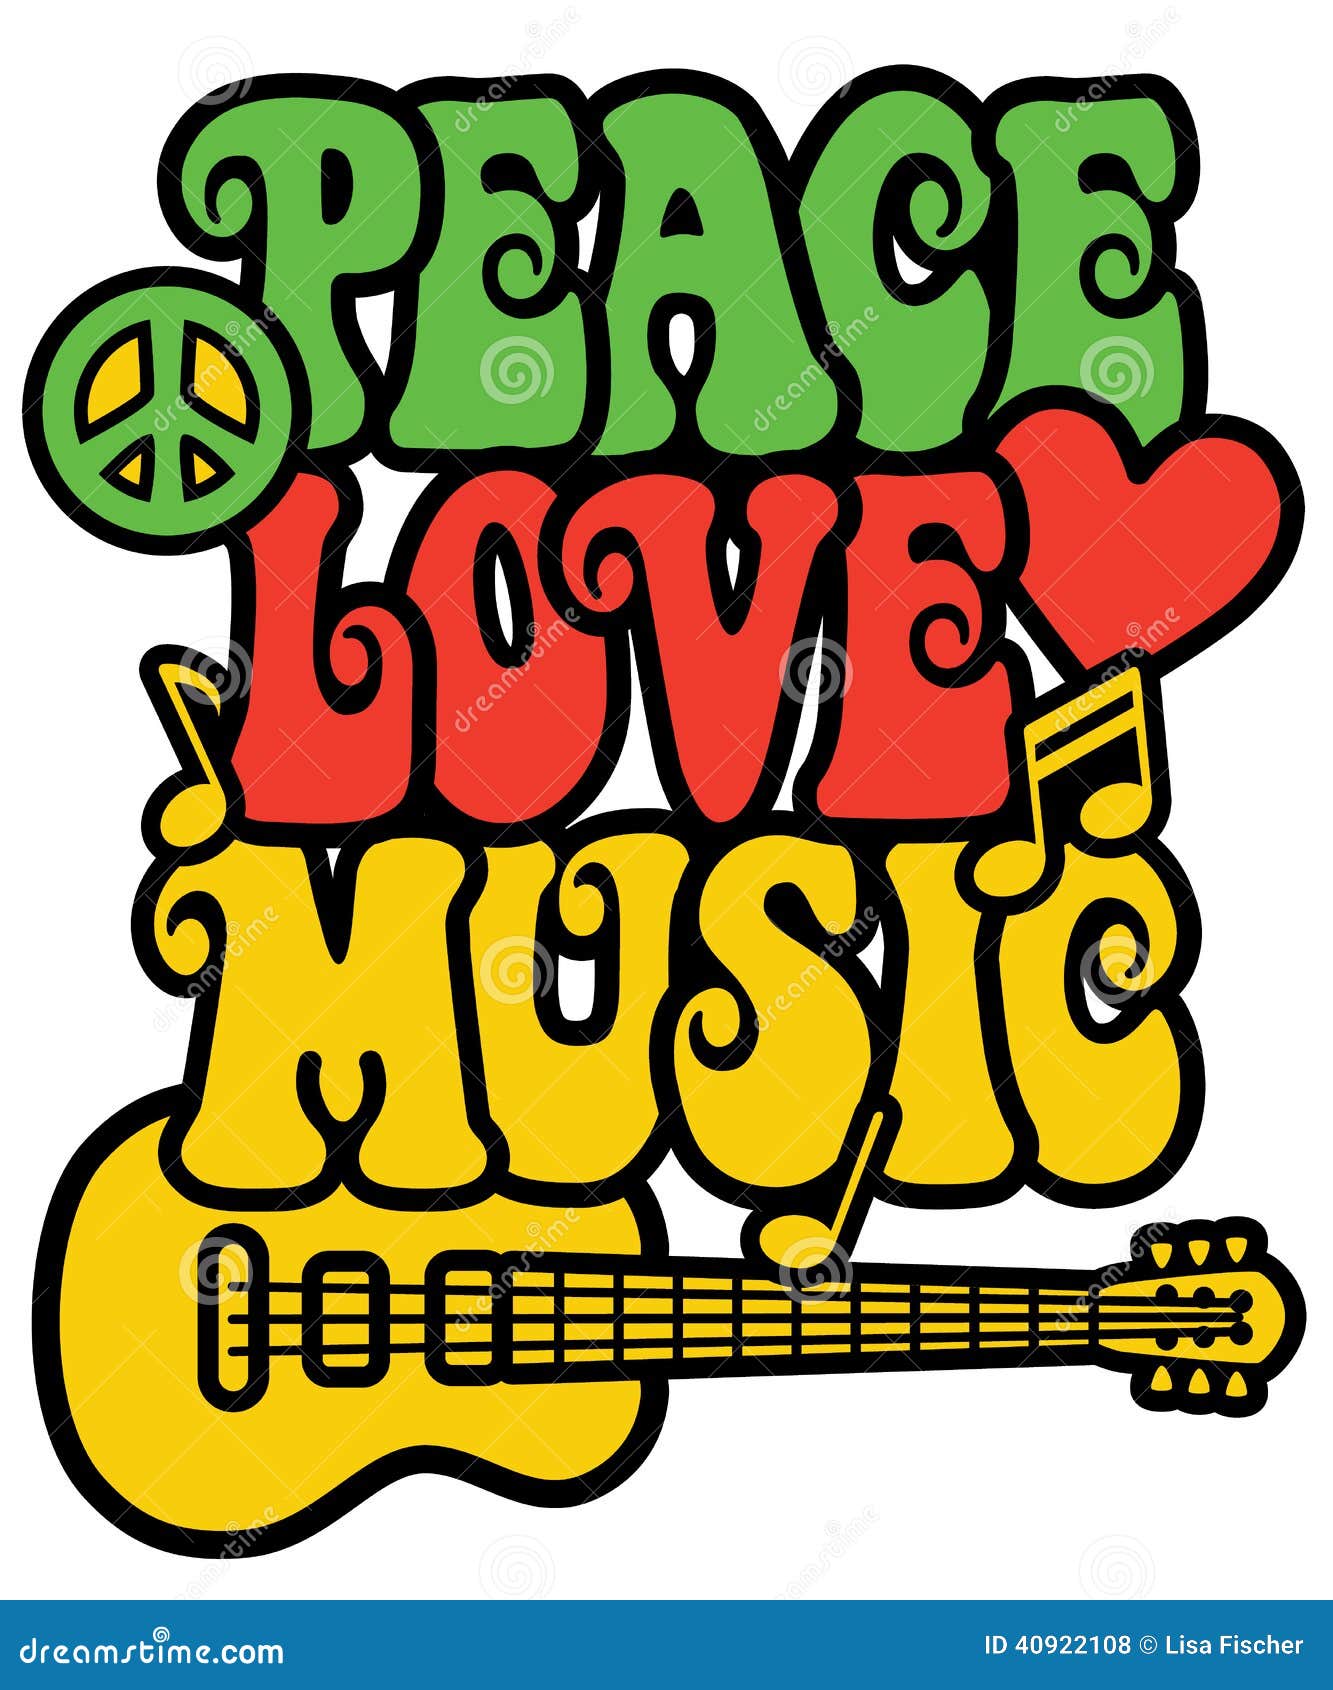 peace love and music in rasta colors